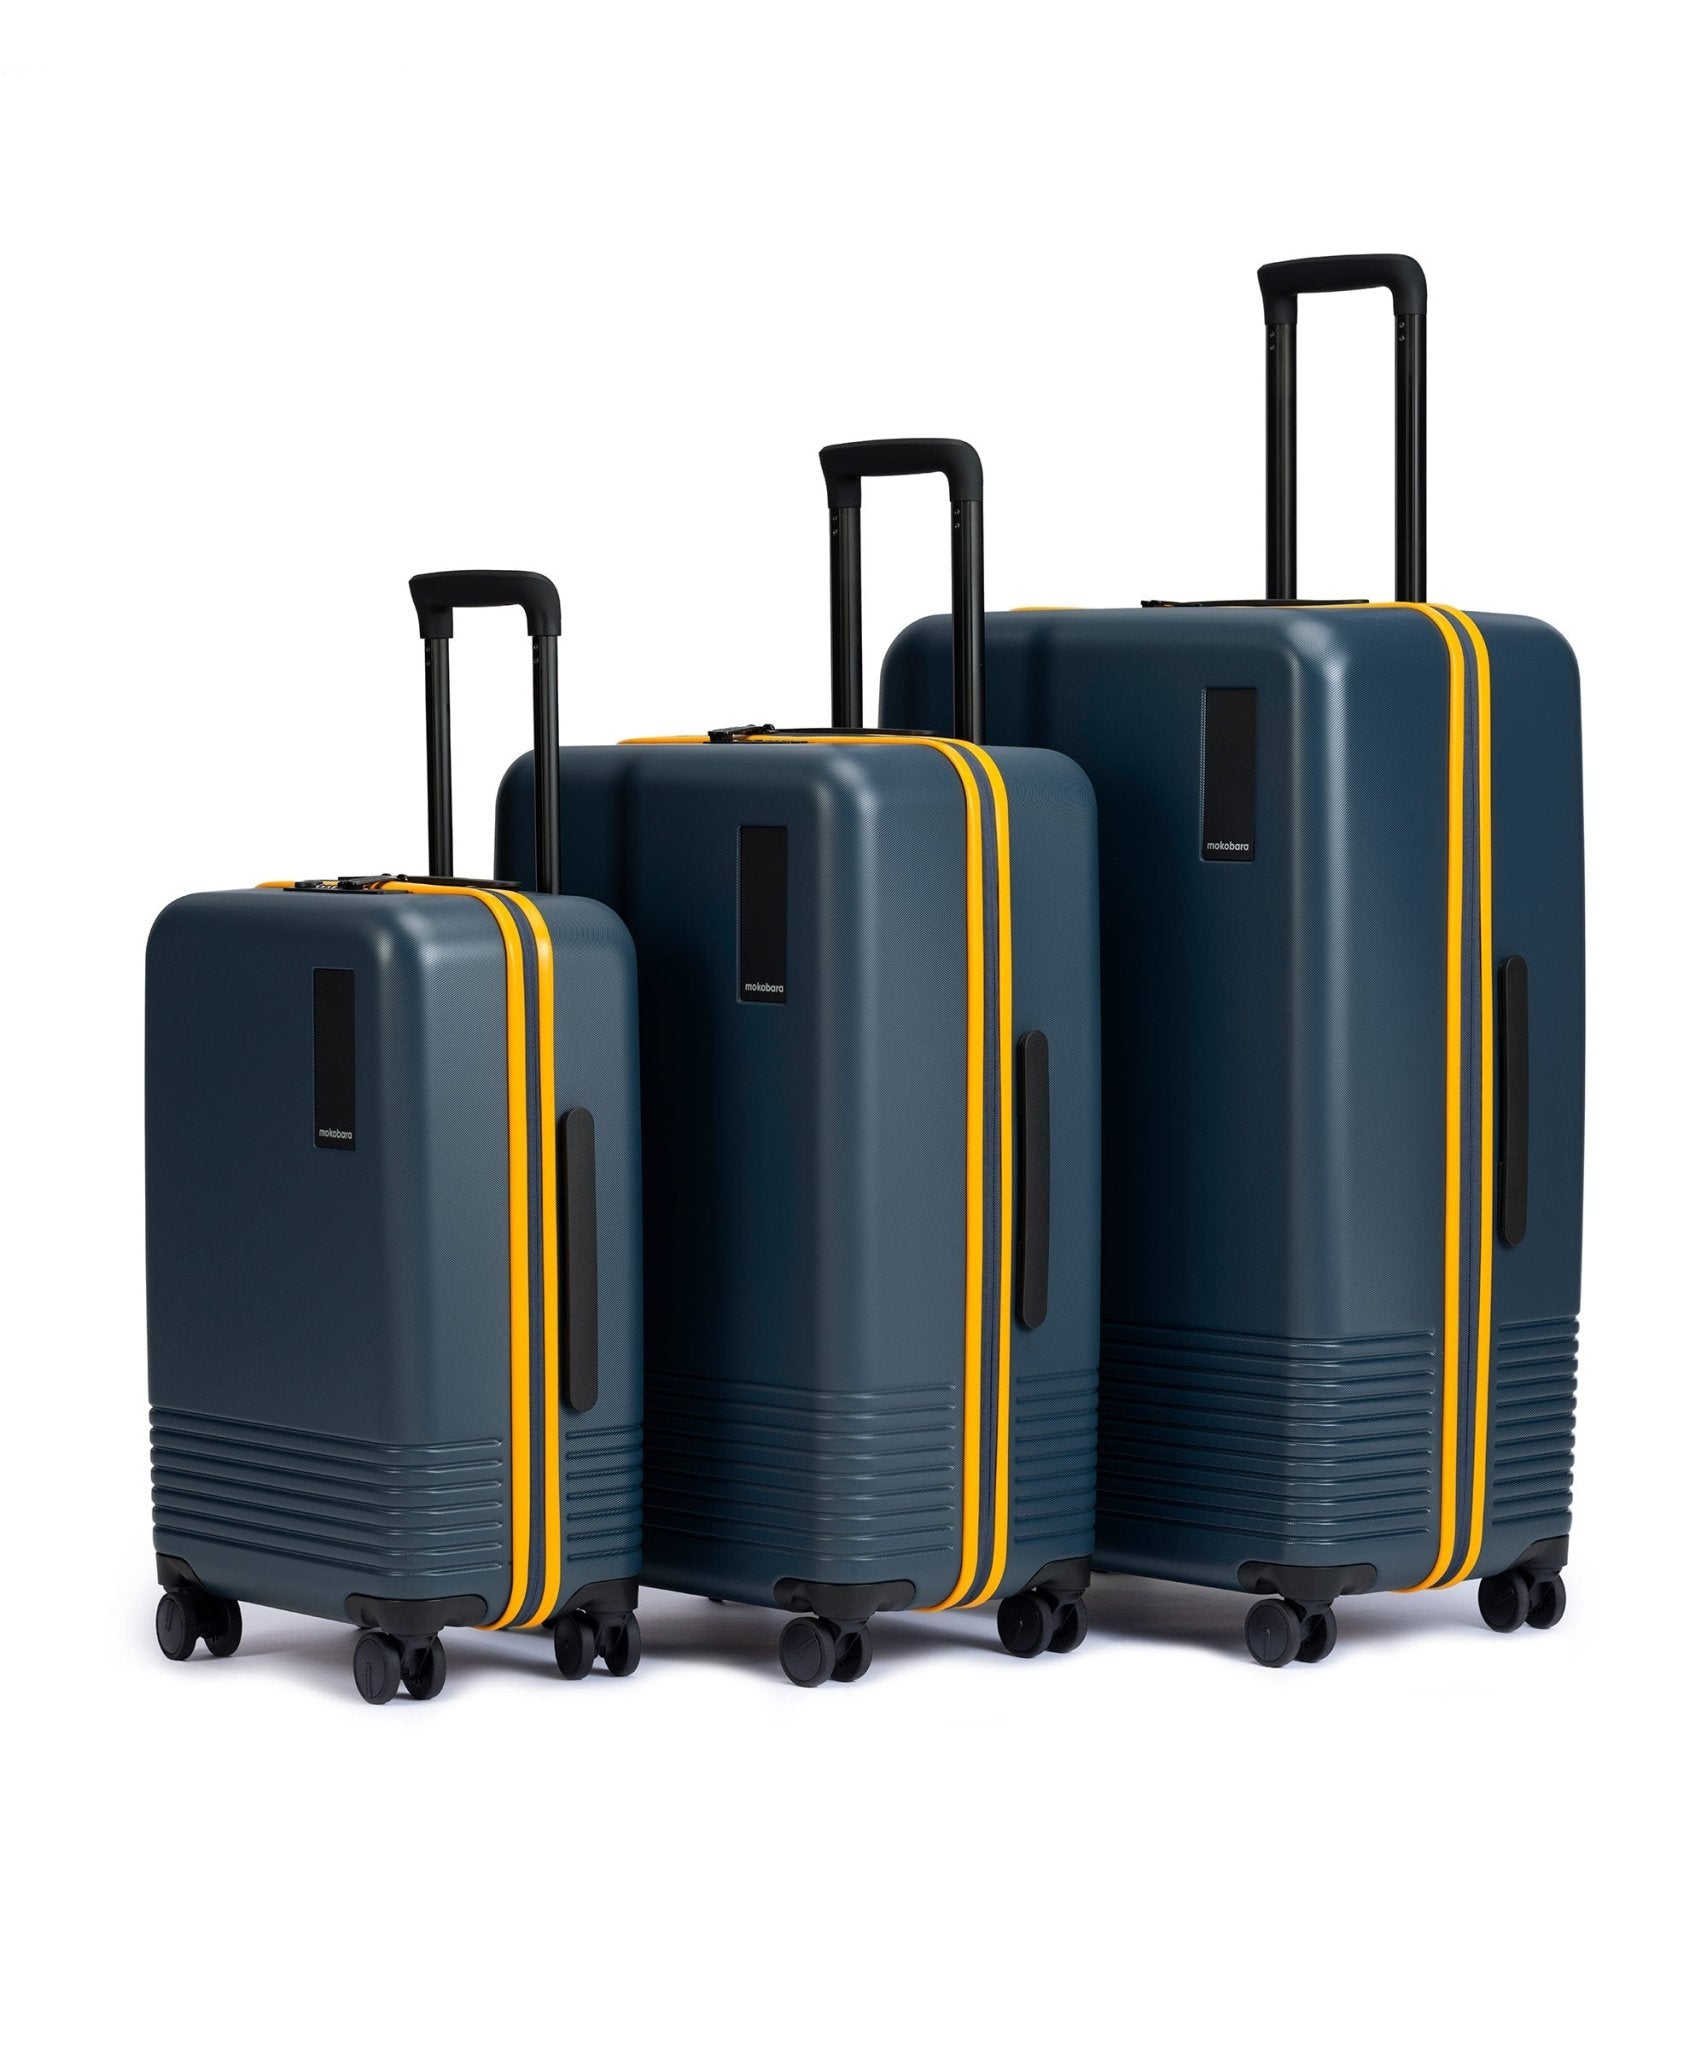 Buy SafariAnti Theft Trolley Bag Set, Small and Medium Size Blue Suitcase,  8 Wheel Softside Polyester Luggage Bags for Travel, 59 cm and 71 cm Cabin Luggage  Trolley for Men and Women